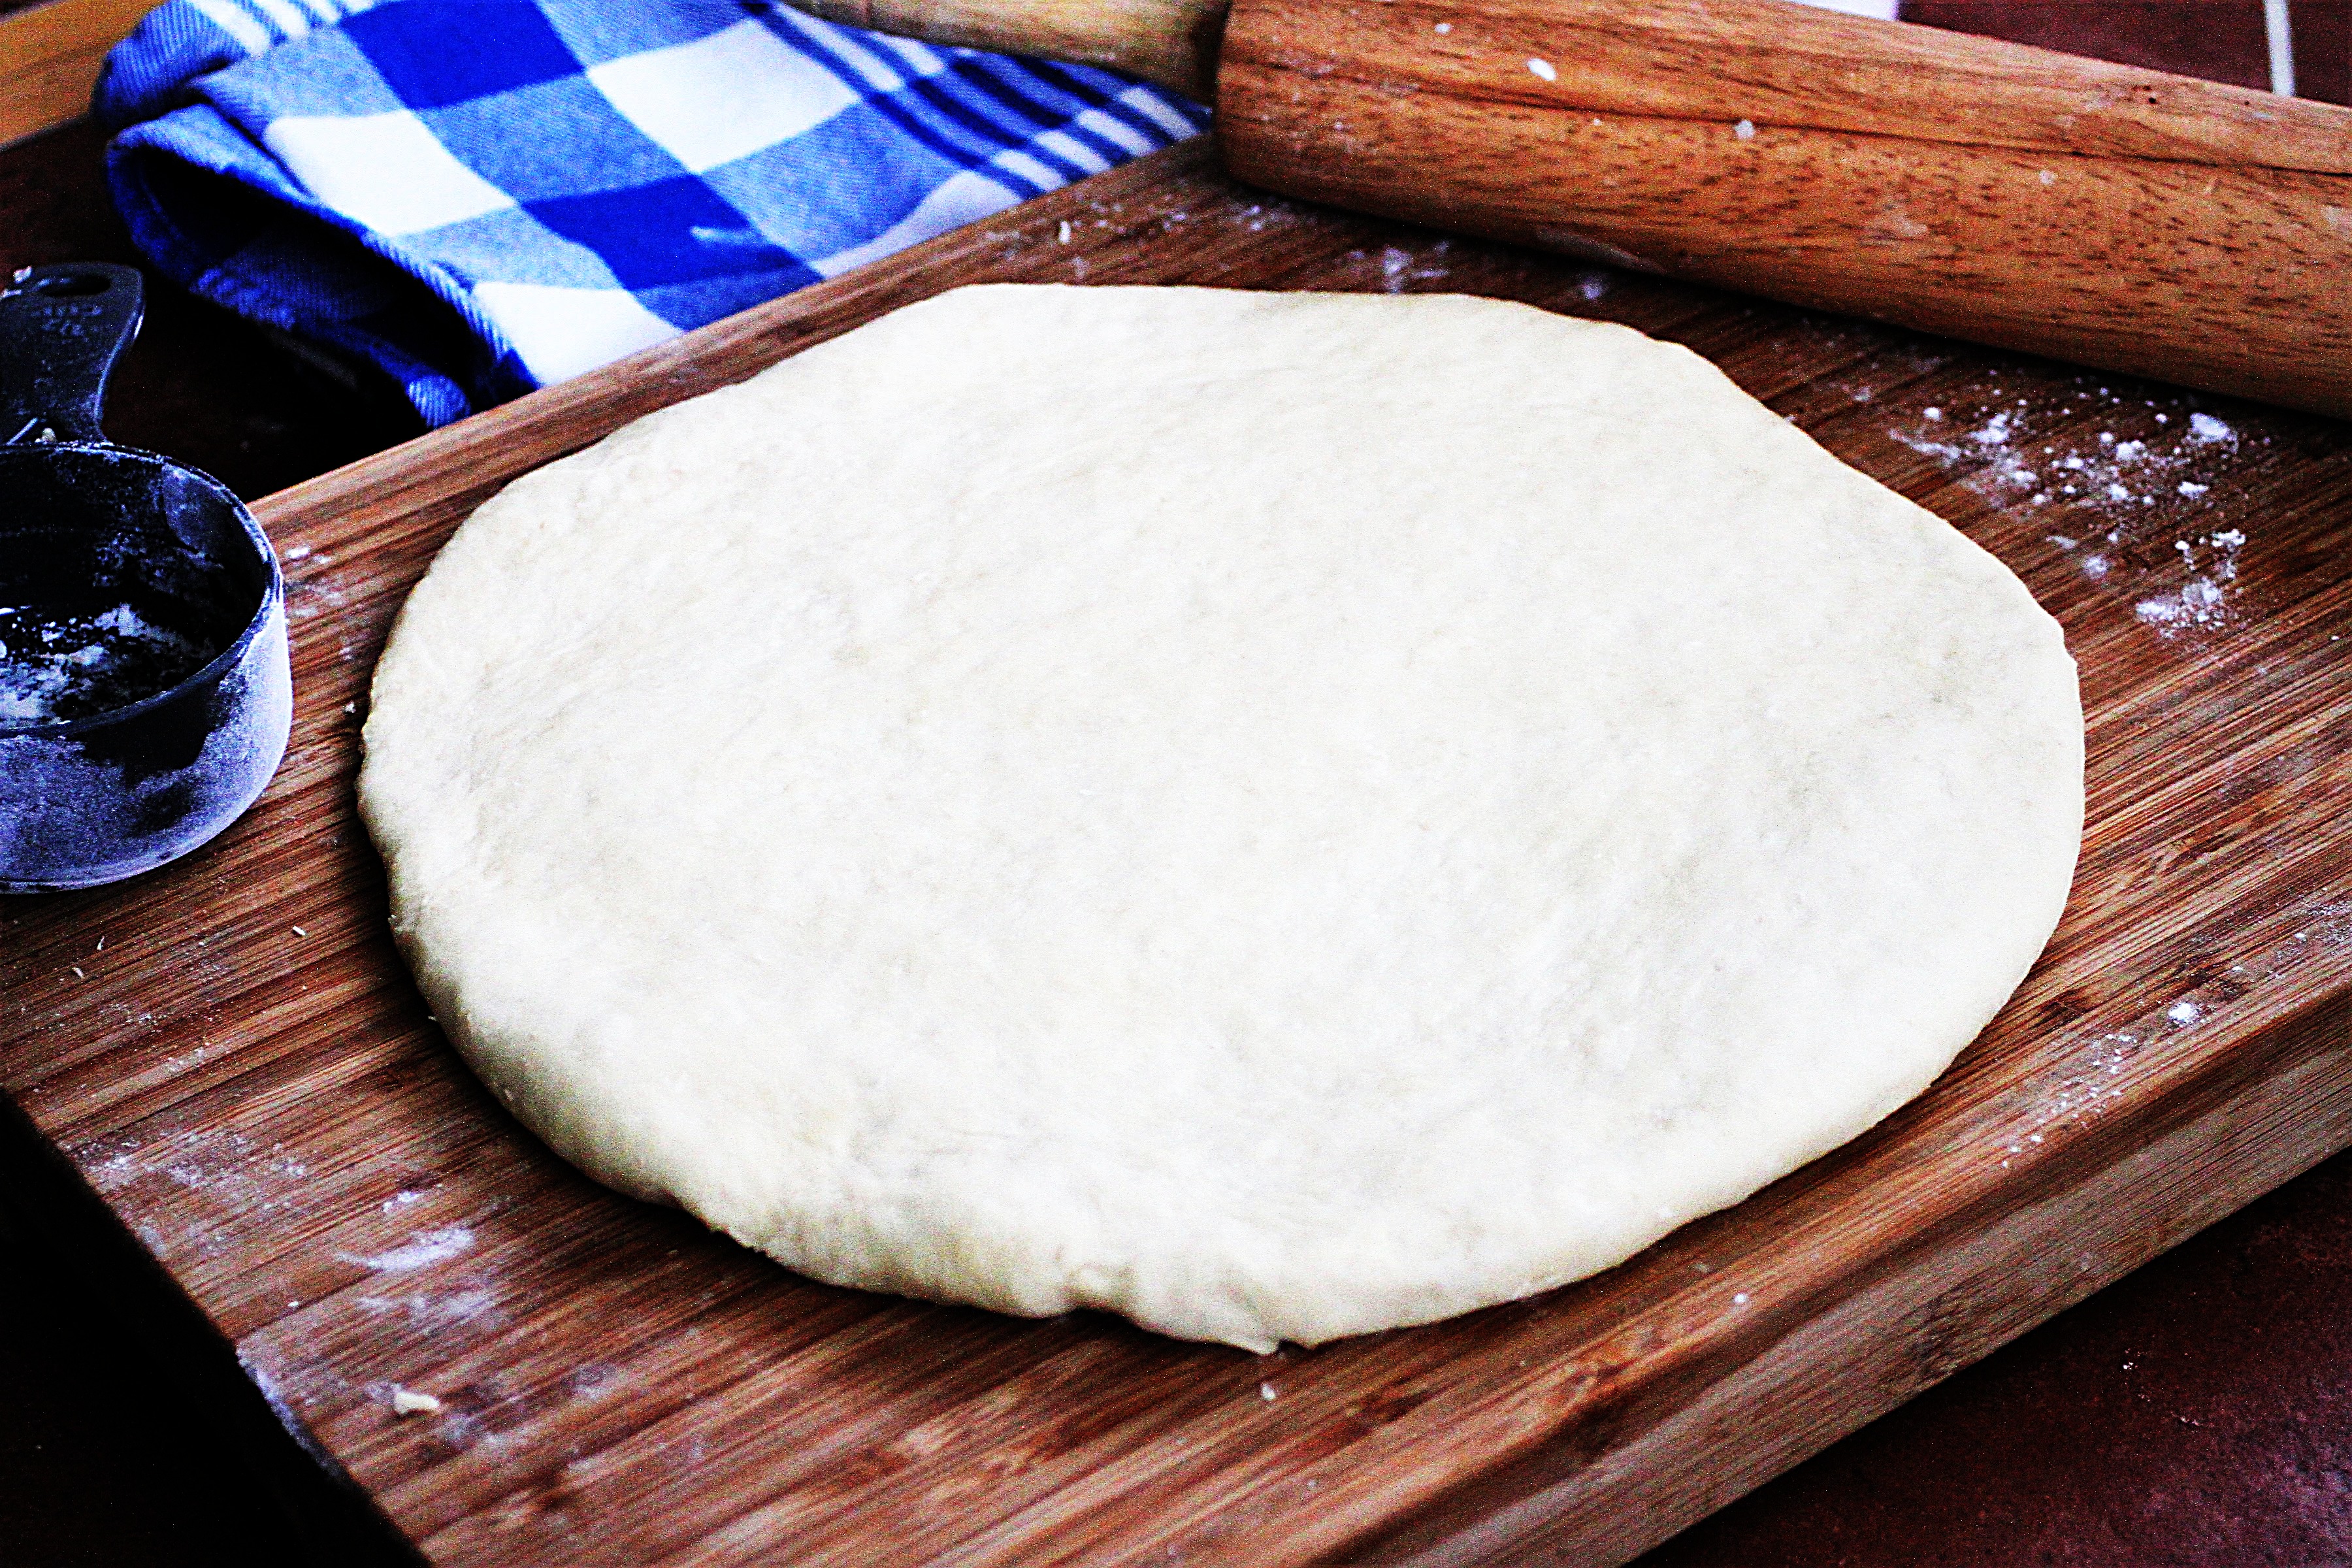 Stupid-Easy Recipe for Ten-Minute Pizza Dough (#1 Top-Rated)